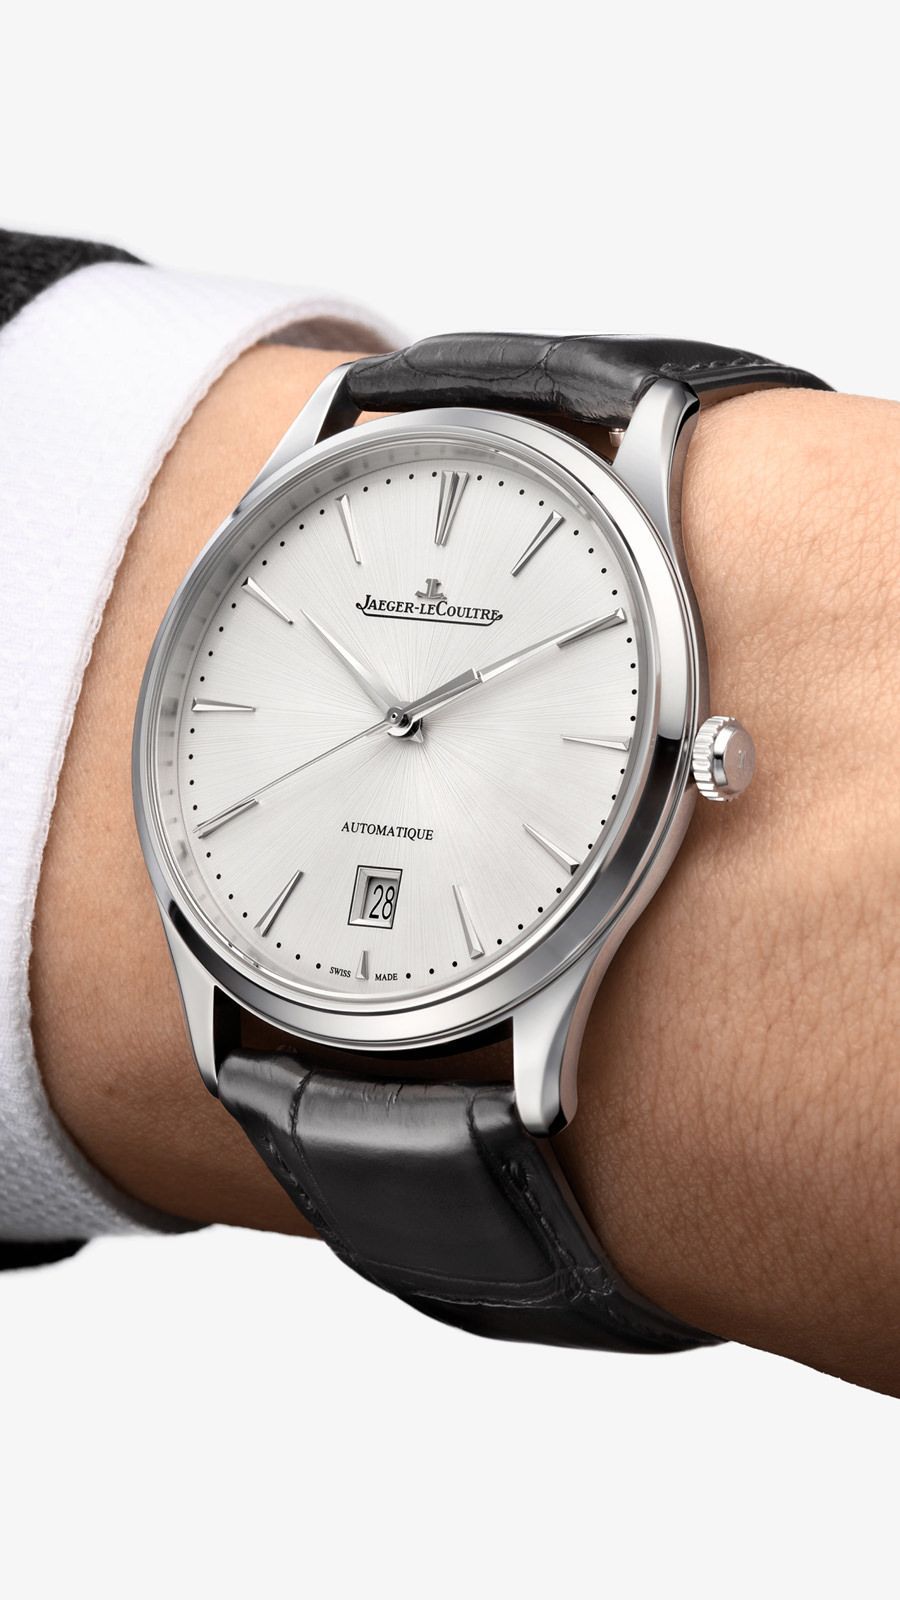 Jaeger-LeCoultre Master Master Ultra Thin Date